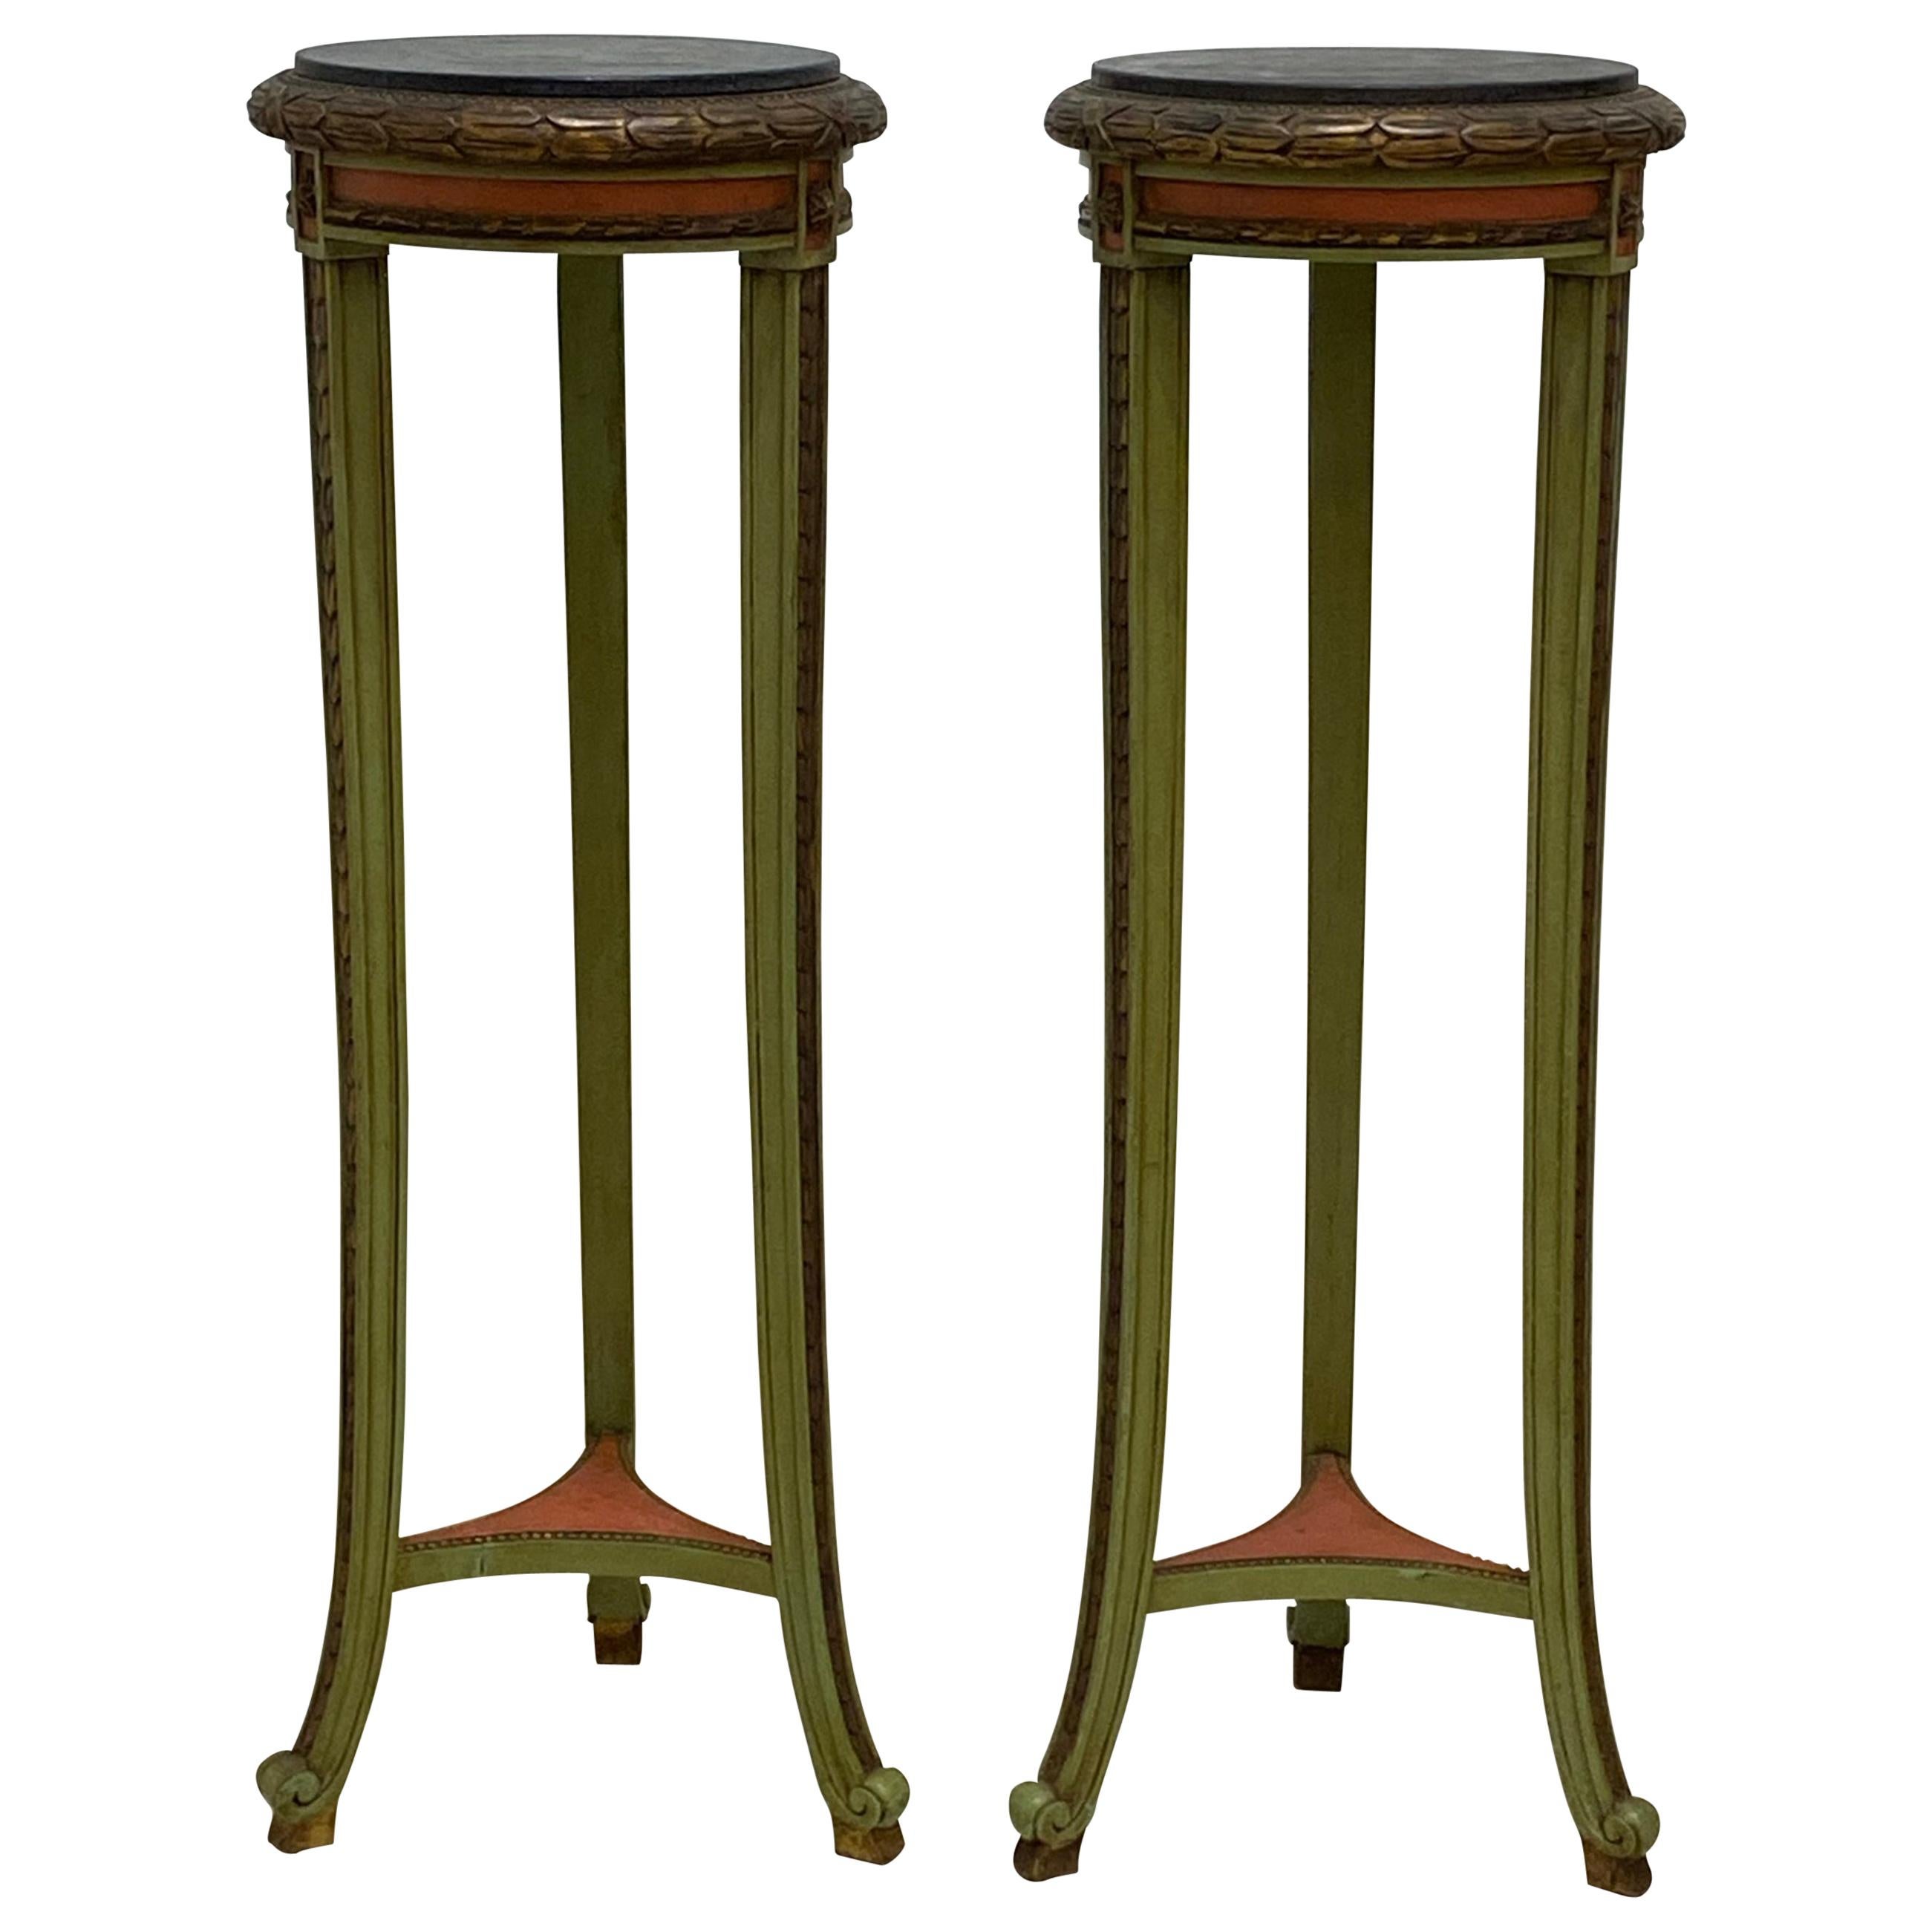 Tall Display Pedestals or Plant Stands, a Pair at 1stDibs